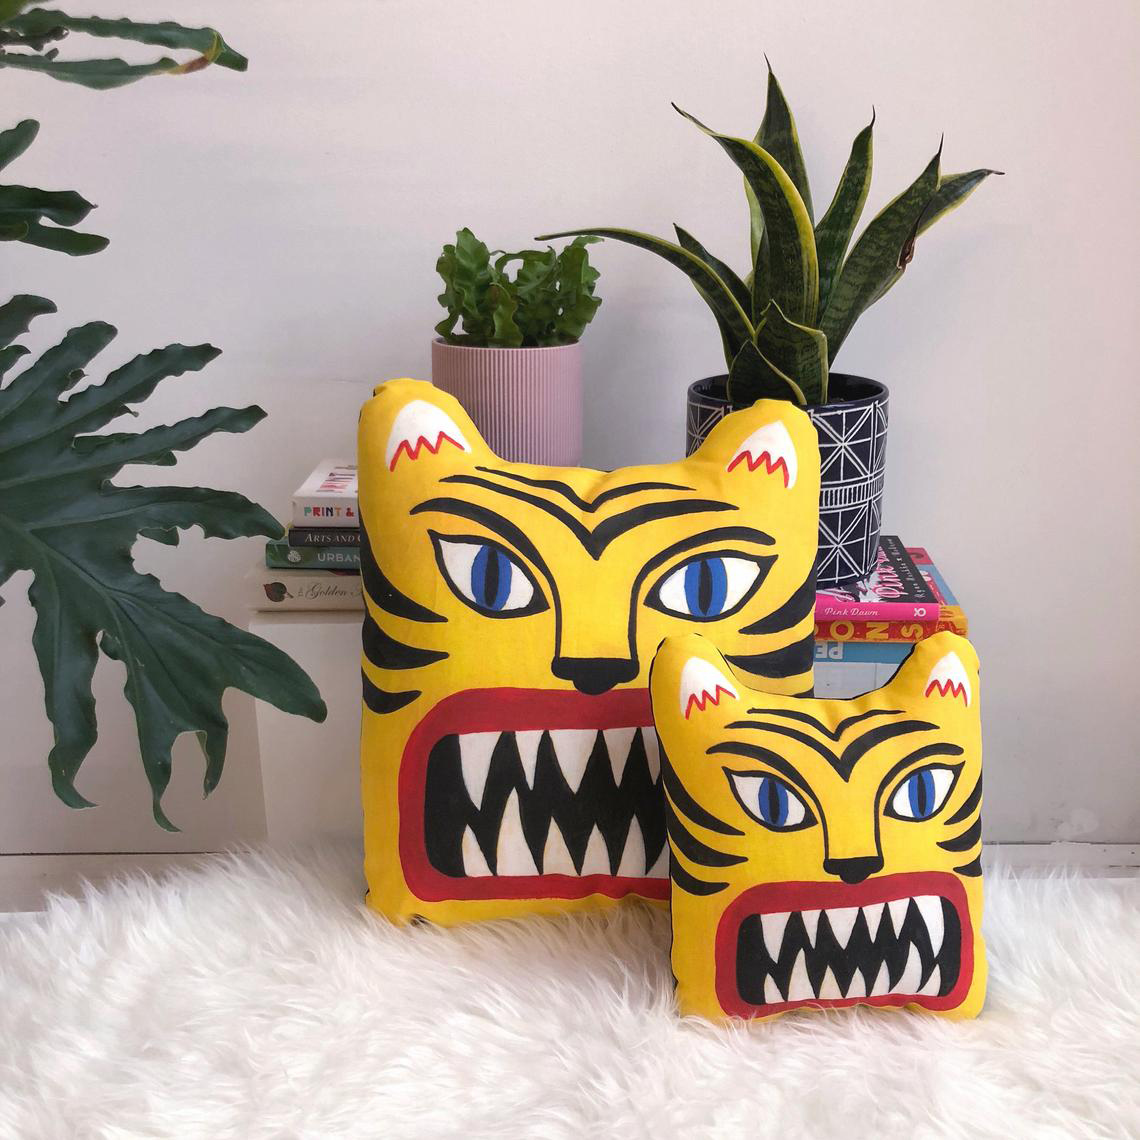 Photo of two lumbar support pillows that are shaped like tiger faces and have a bright orange tiger design on them. They rest on a white furry rug in front of some house plants.